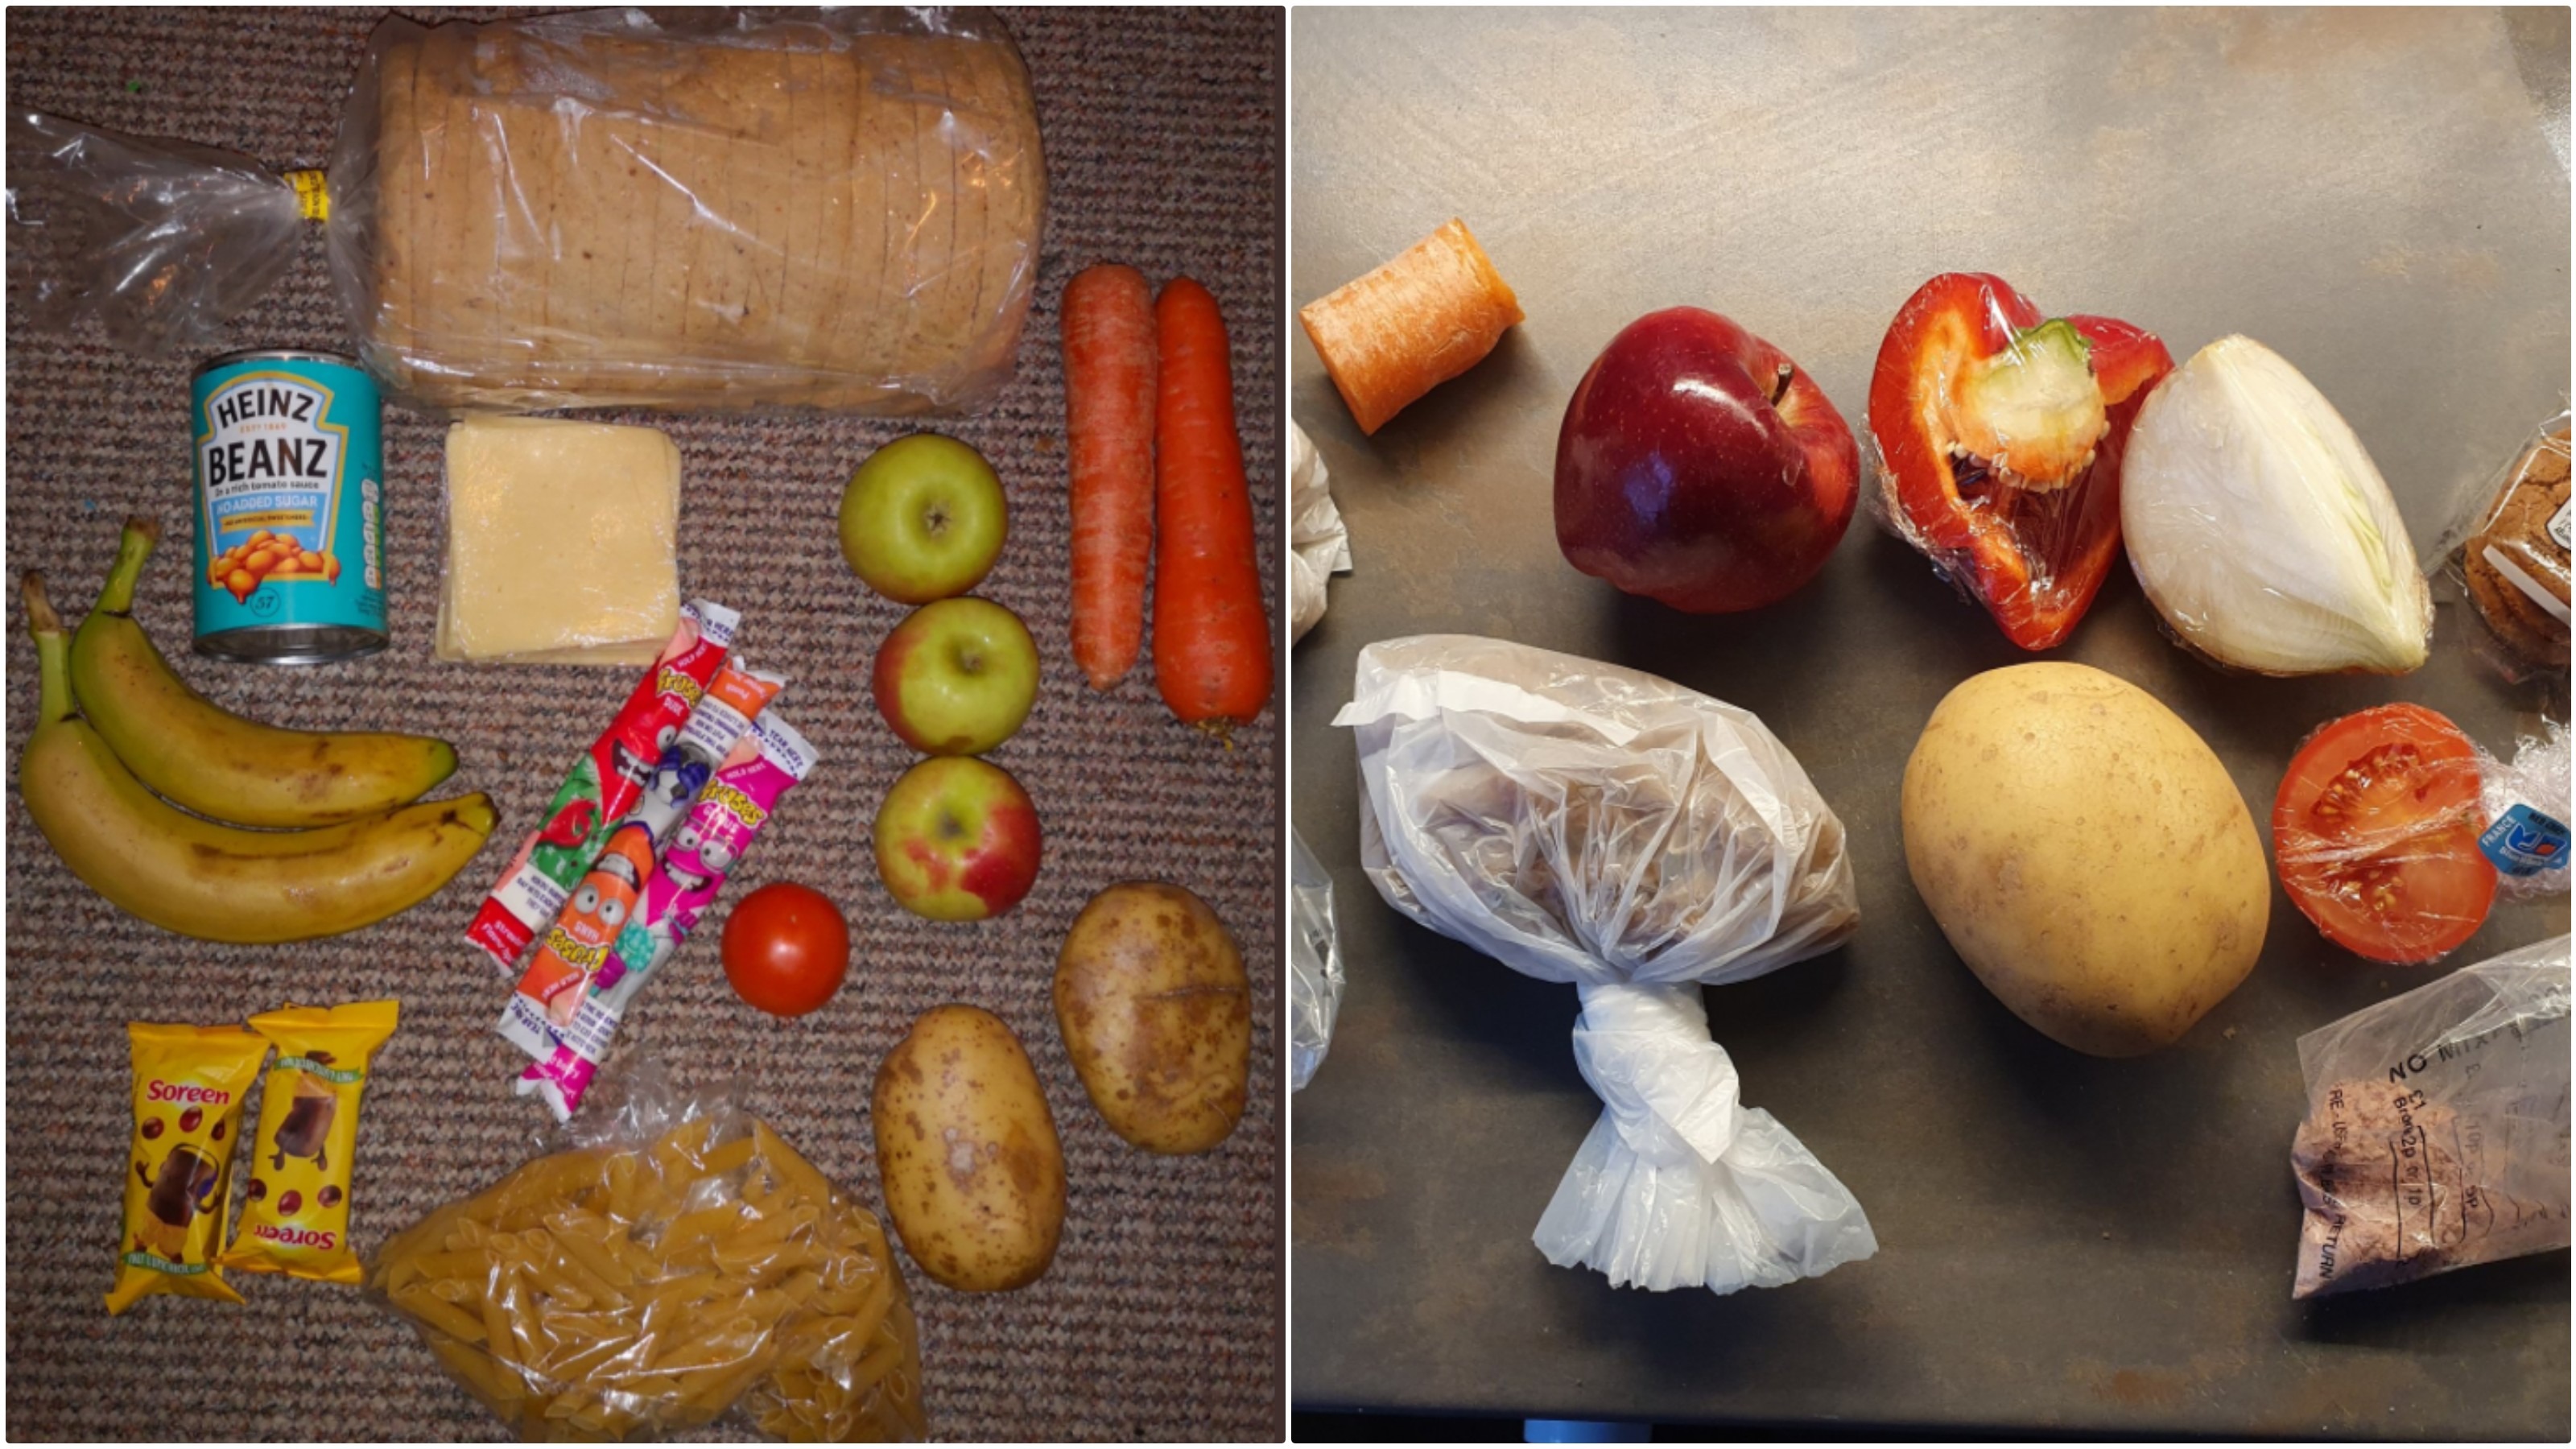 Free school meals: Parents blast 'woefully inadequate' food parcels for